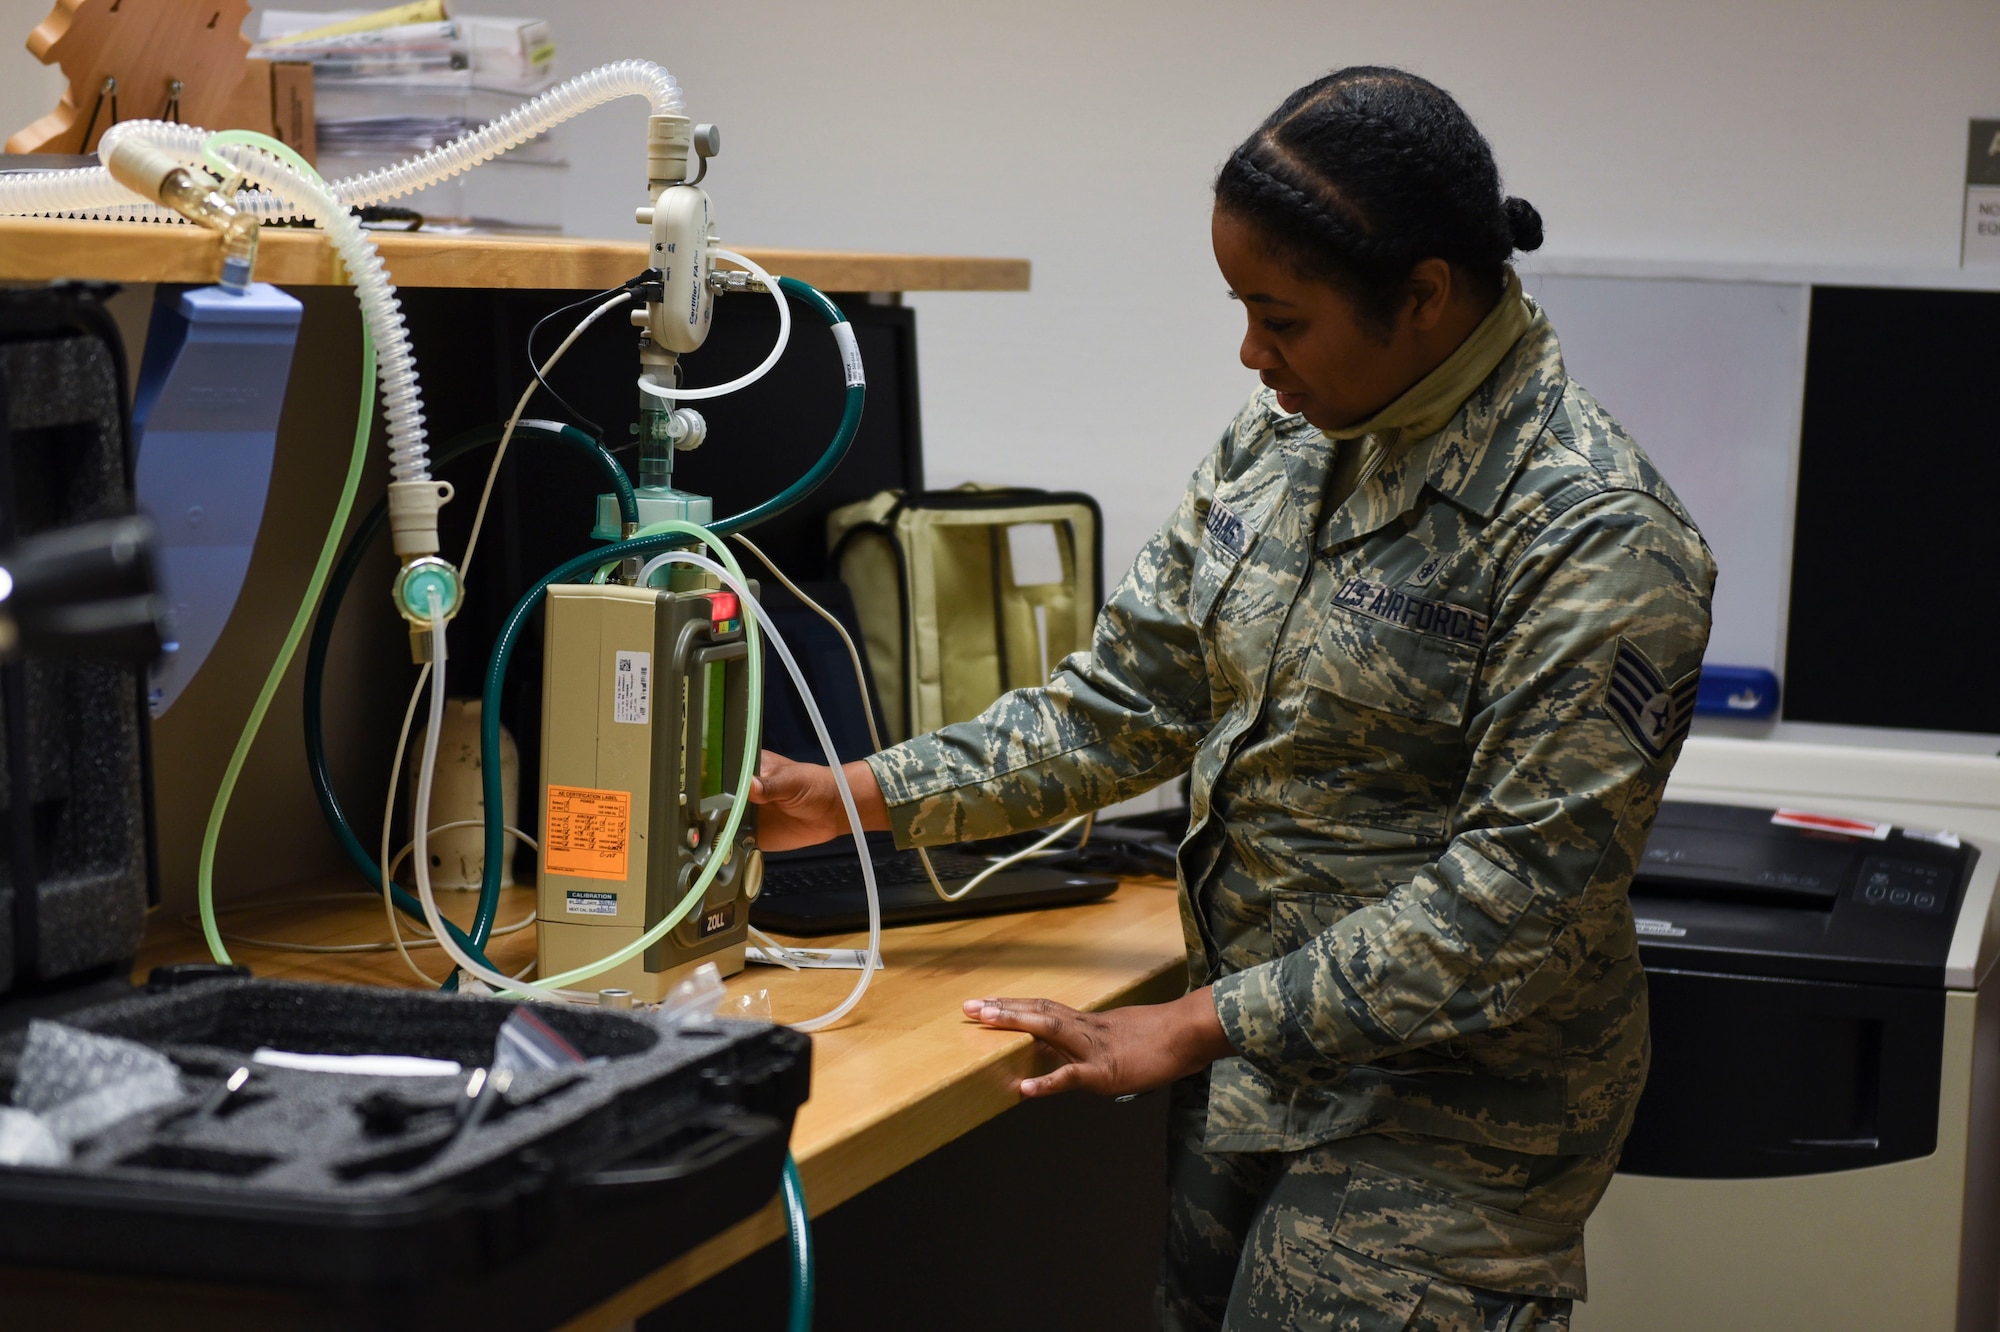 U.S. Air Force Staff Sgt. Neekia Williams, 52nd Medical Group biomedical equipment technician, inspects a ventilator at Spangdahlem Air Base, Germany, April 1, 2020. Williams ensures ventilators are working properly if needed for COVID-19 care. (U.S. Air Force photo by Senior Airman Melody W. Howley)